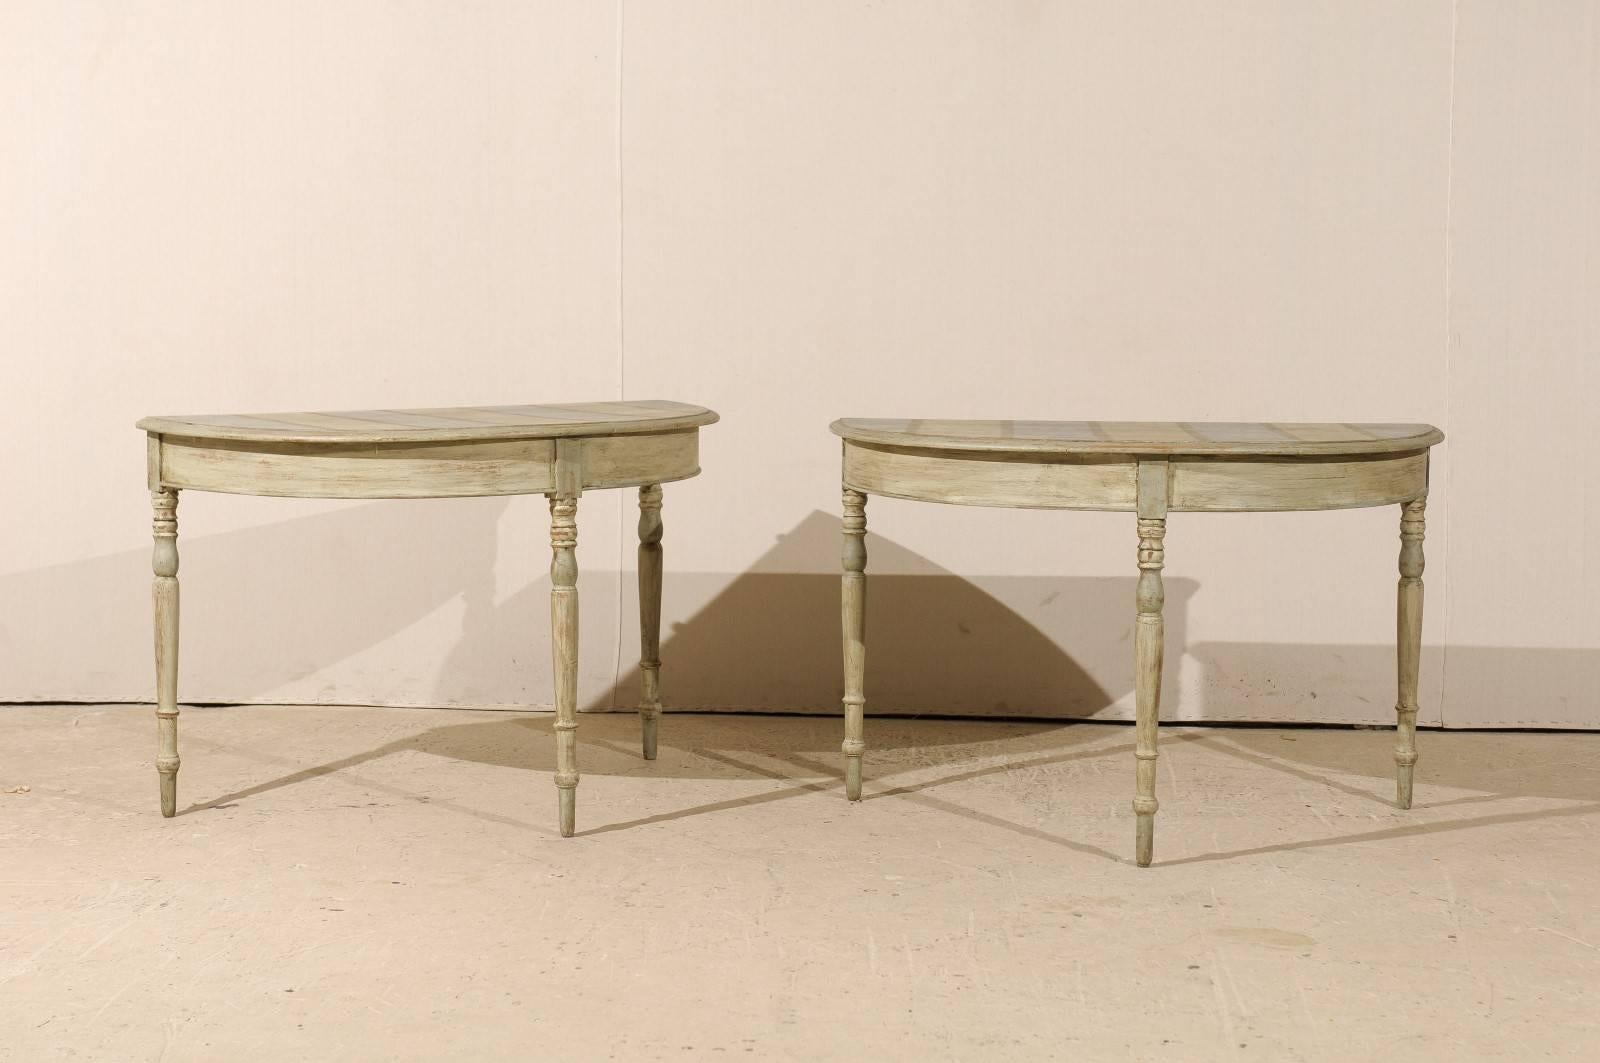 A pair of 19th century Swedish demilune tables. This pair of painted wood demilune tables features half moon tops over round aprons. These demilune console tables are raised on three turned and tapered legs. The tops consist of a wide stripe pattern